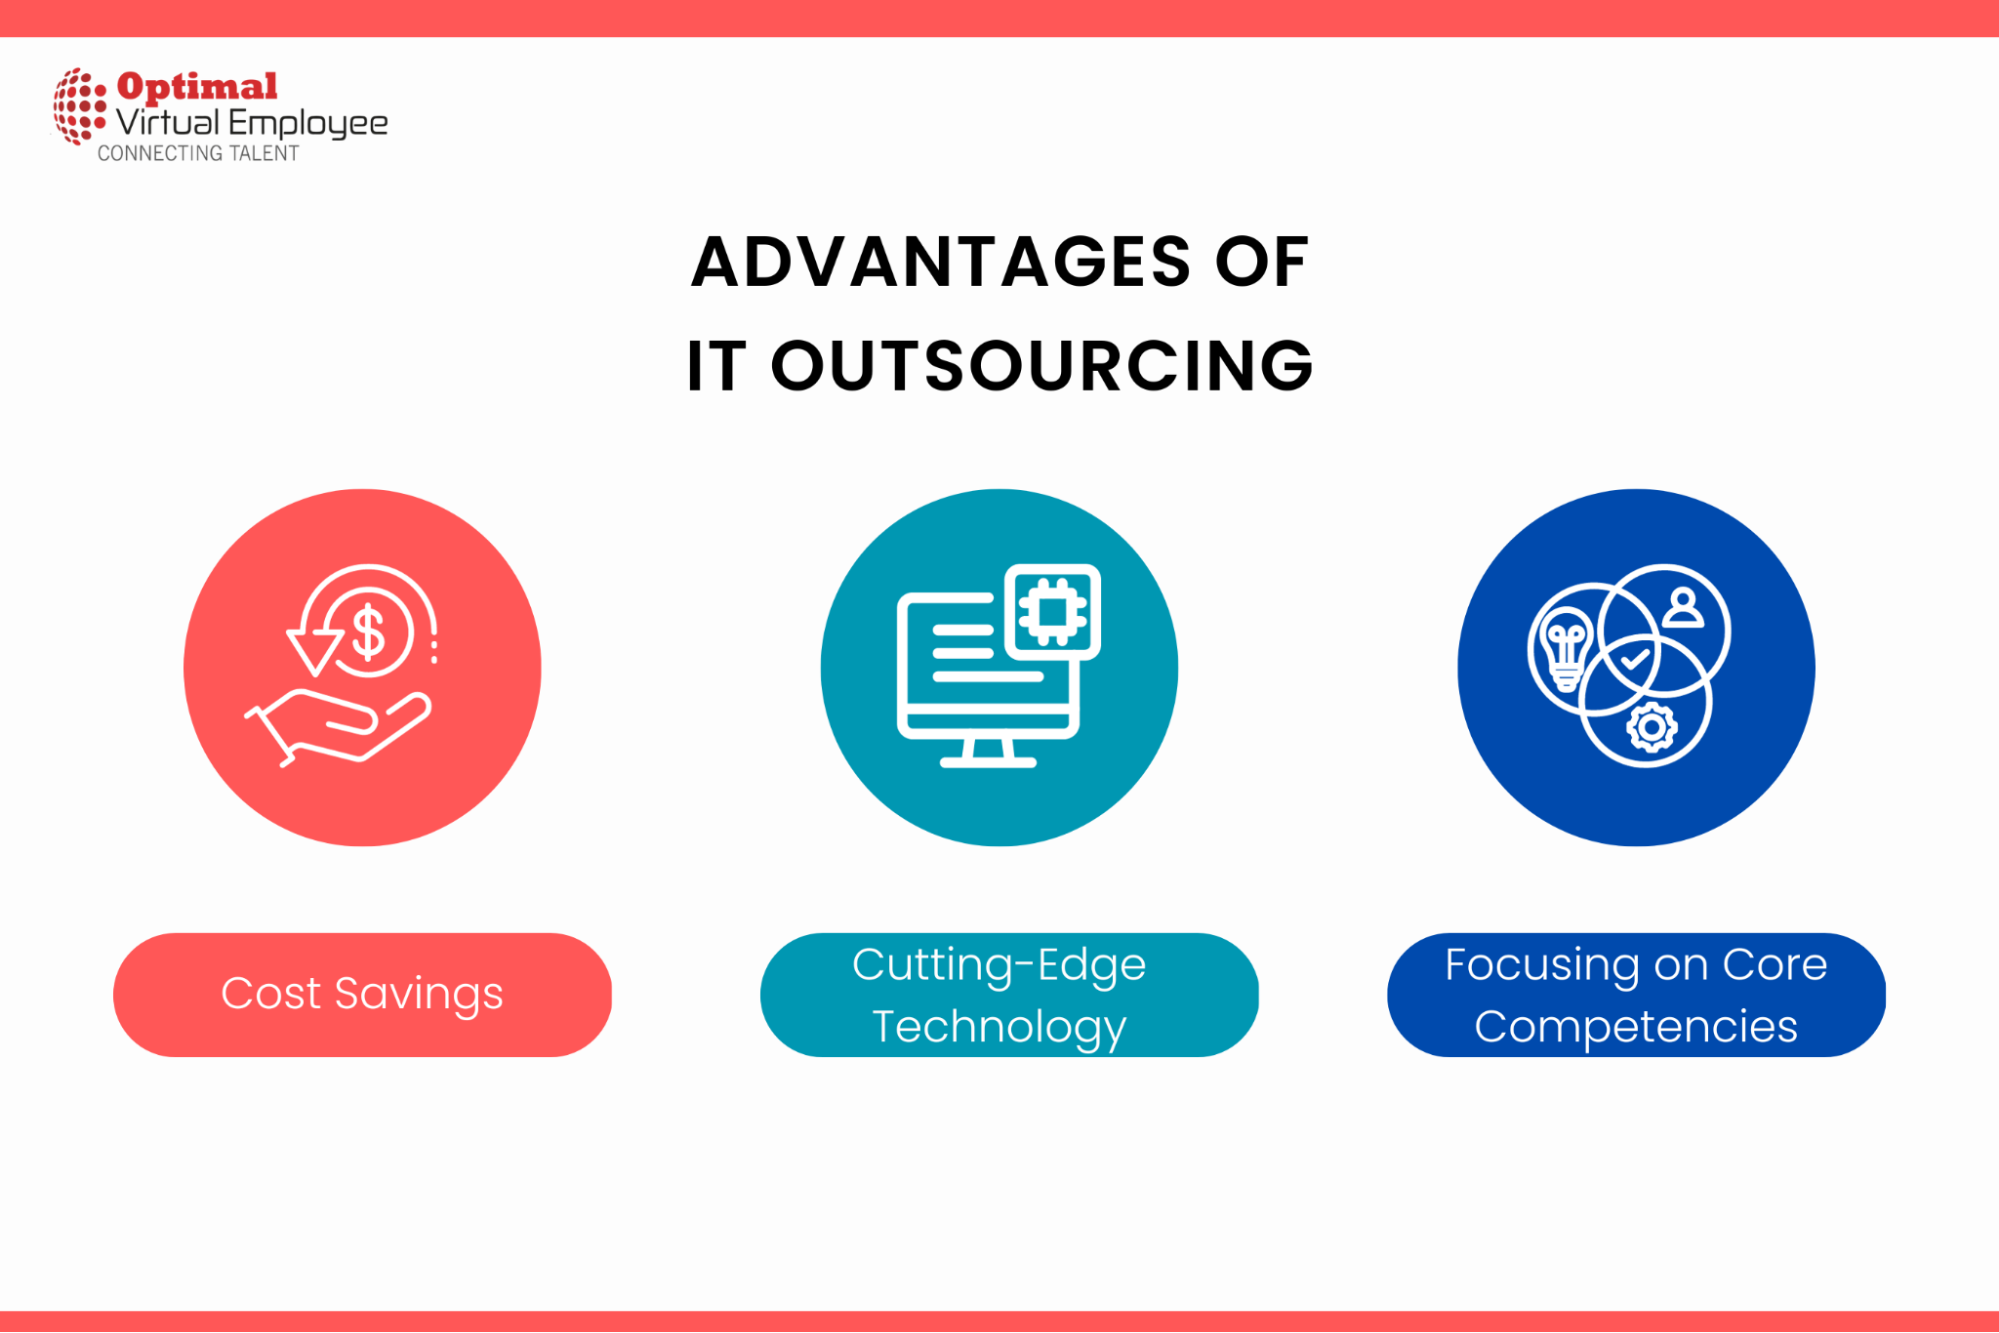 Definition and Advantages of IT Outsourcing